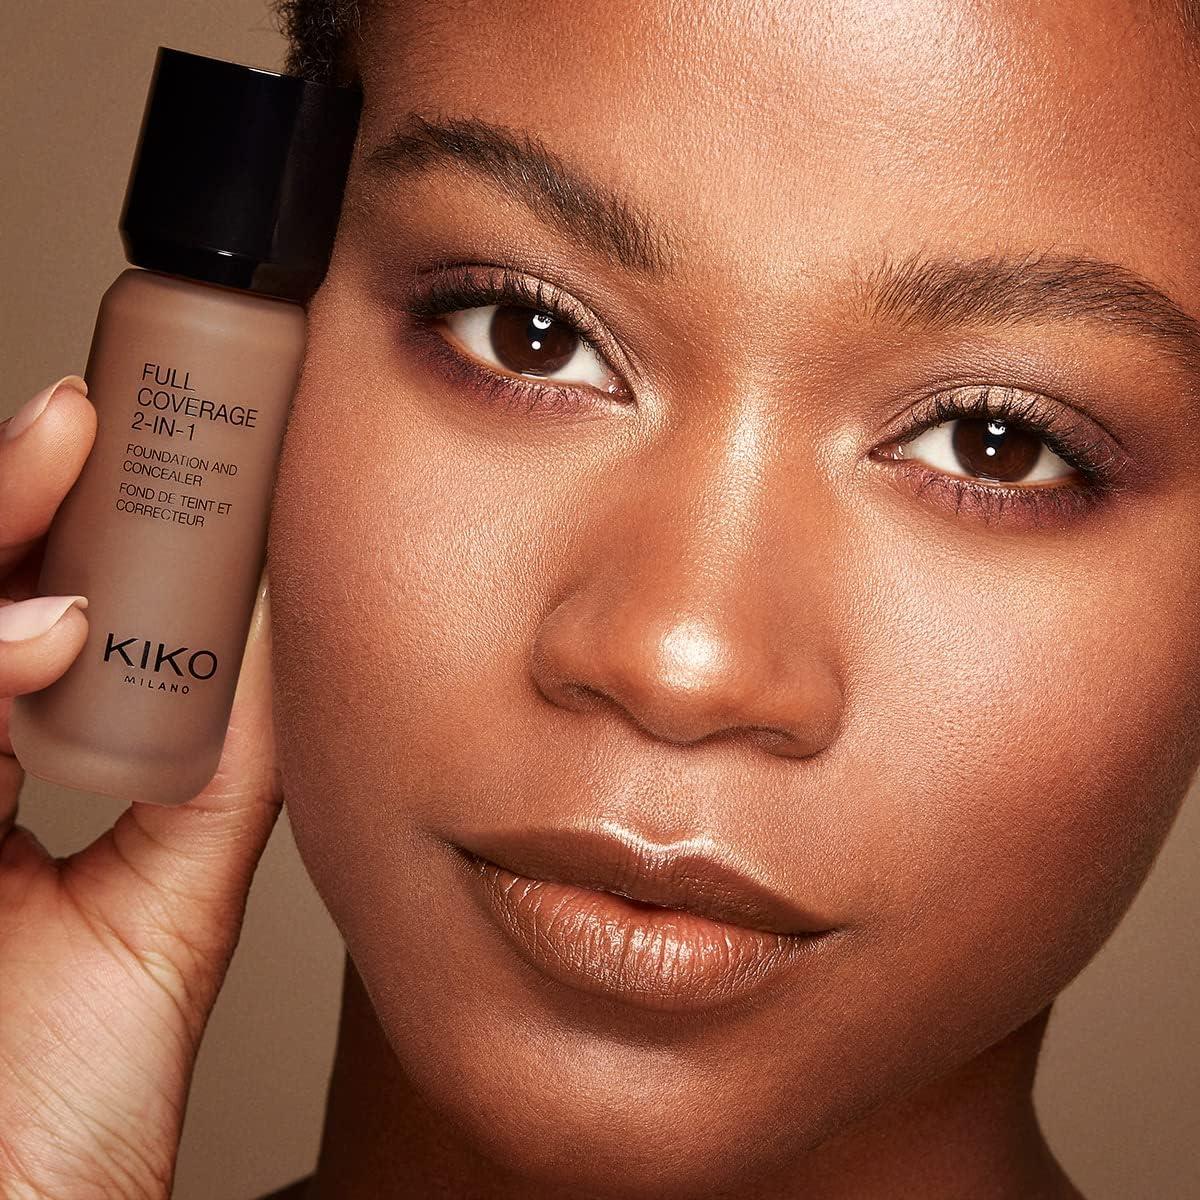 Full Coverage 2 in 1 Foundation & Concealer - Full Coverage 2-in-1